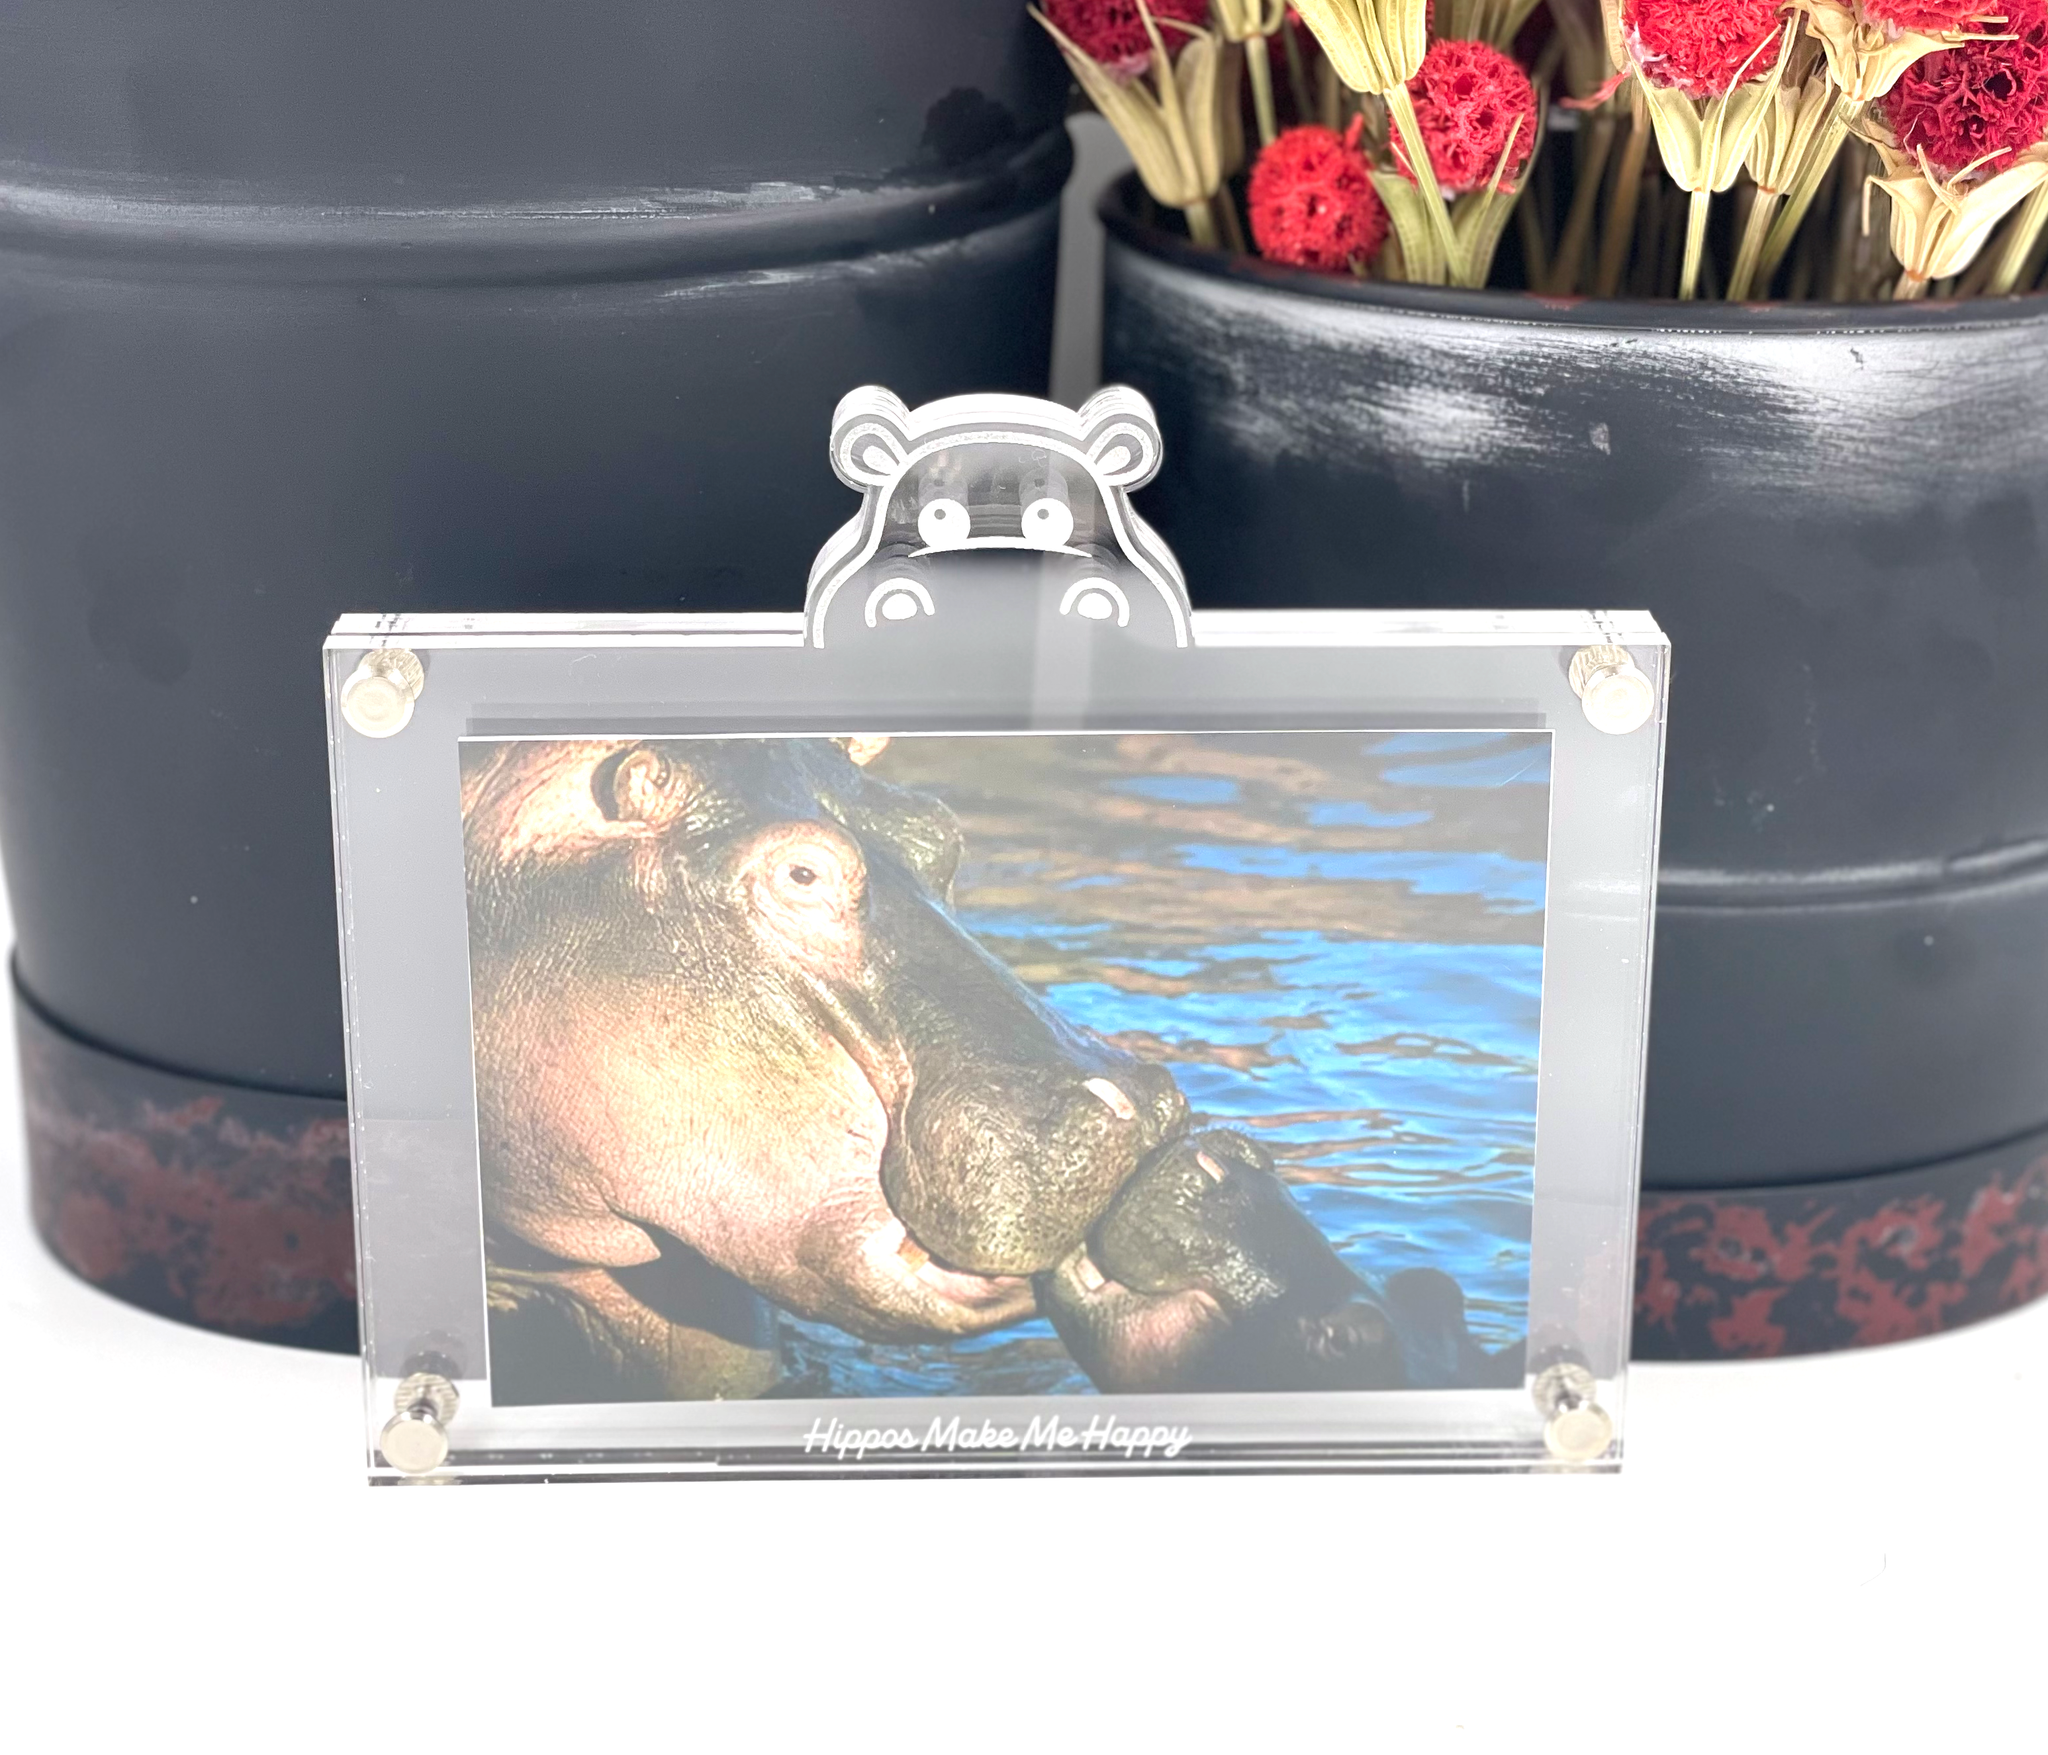 Hippos Make Me Happy Picture Frame | Personalized Hippo Picture Frame | Fiona Picture Frame | Floating Picture Frame